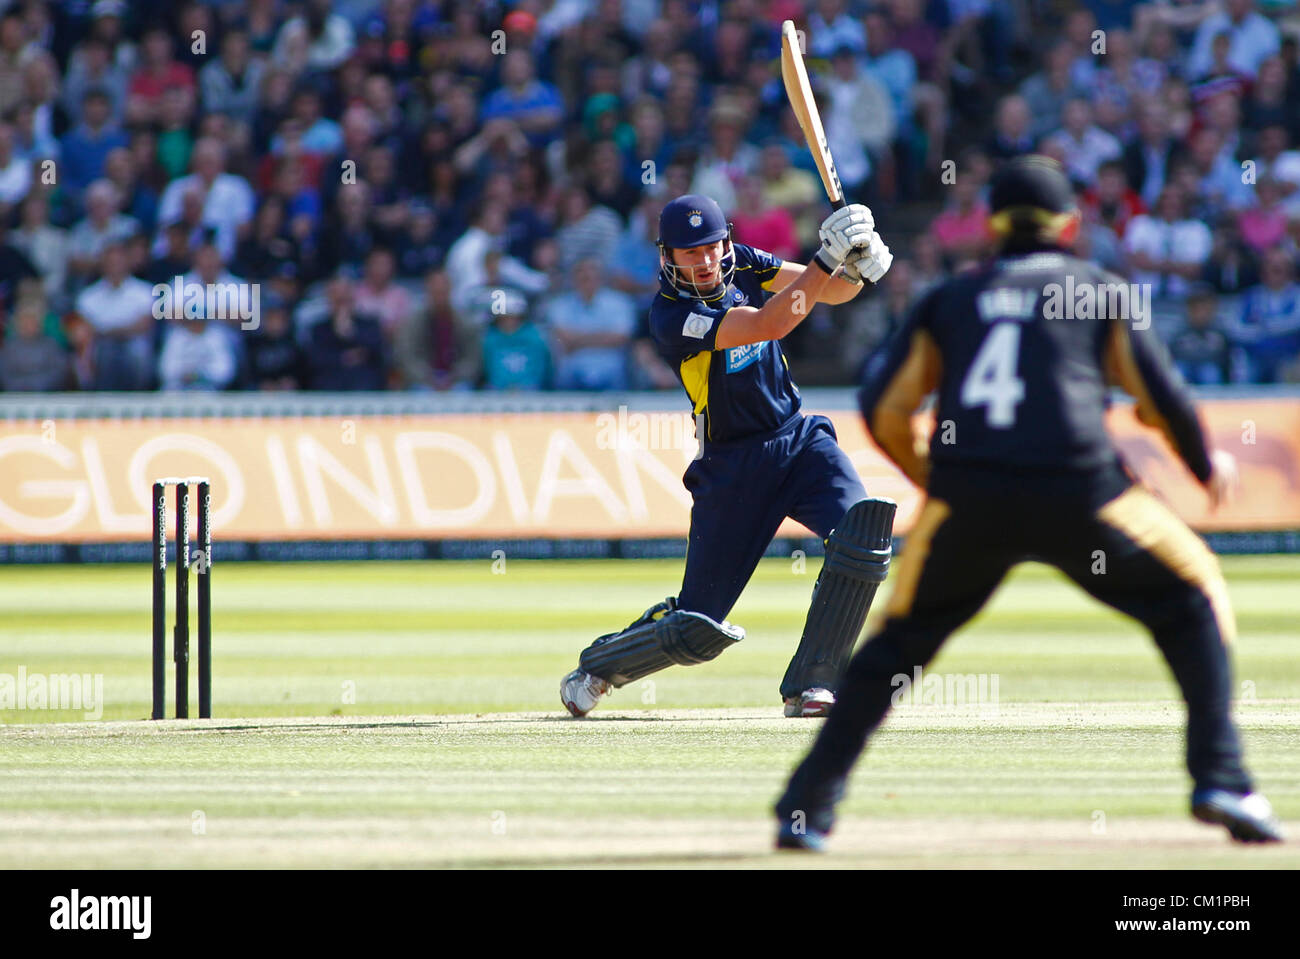 15/09/2012 Edgbaston, England. James Vince hits the ball to Ian Blackwell during the CB40 final match between Hampshire and Warwickshire played at Lords Cricket Ground: Mandatory credit: Mitchell Gunn Stock Photo